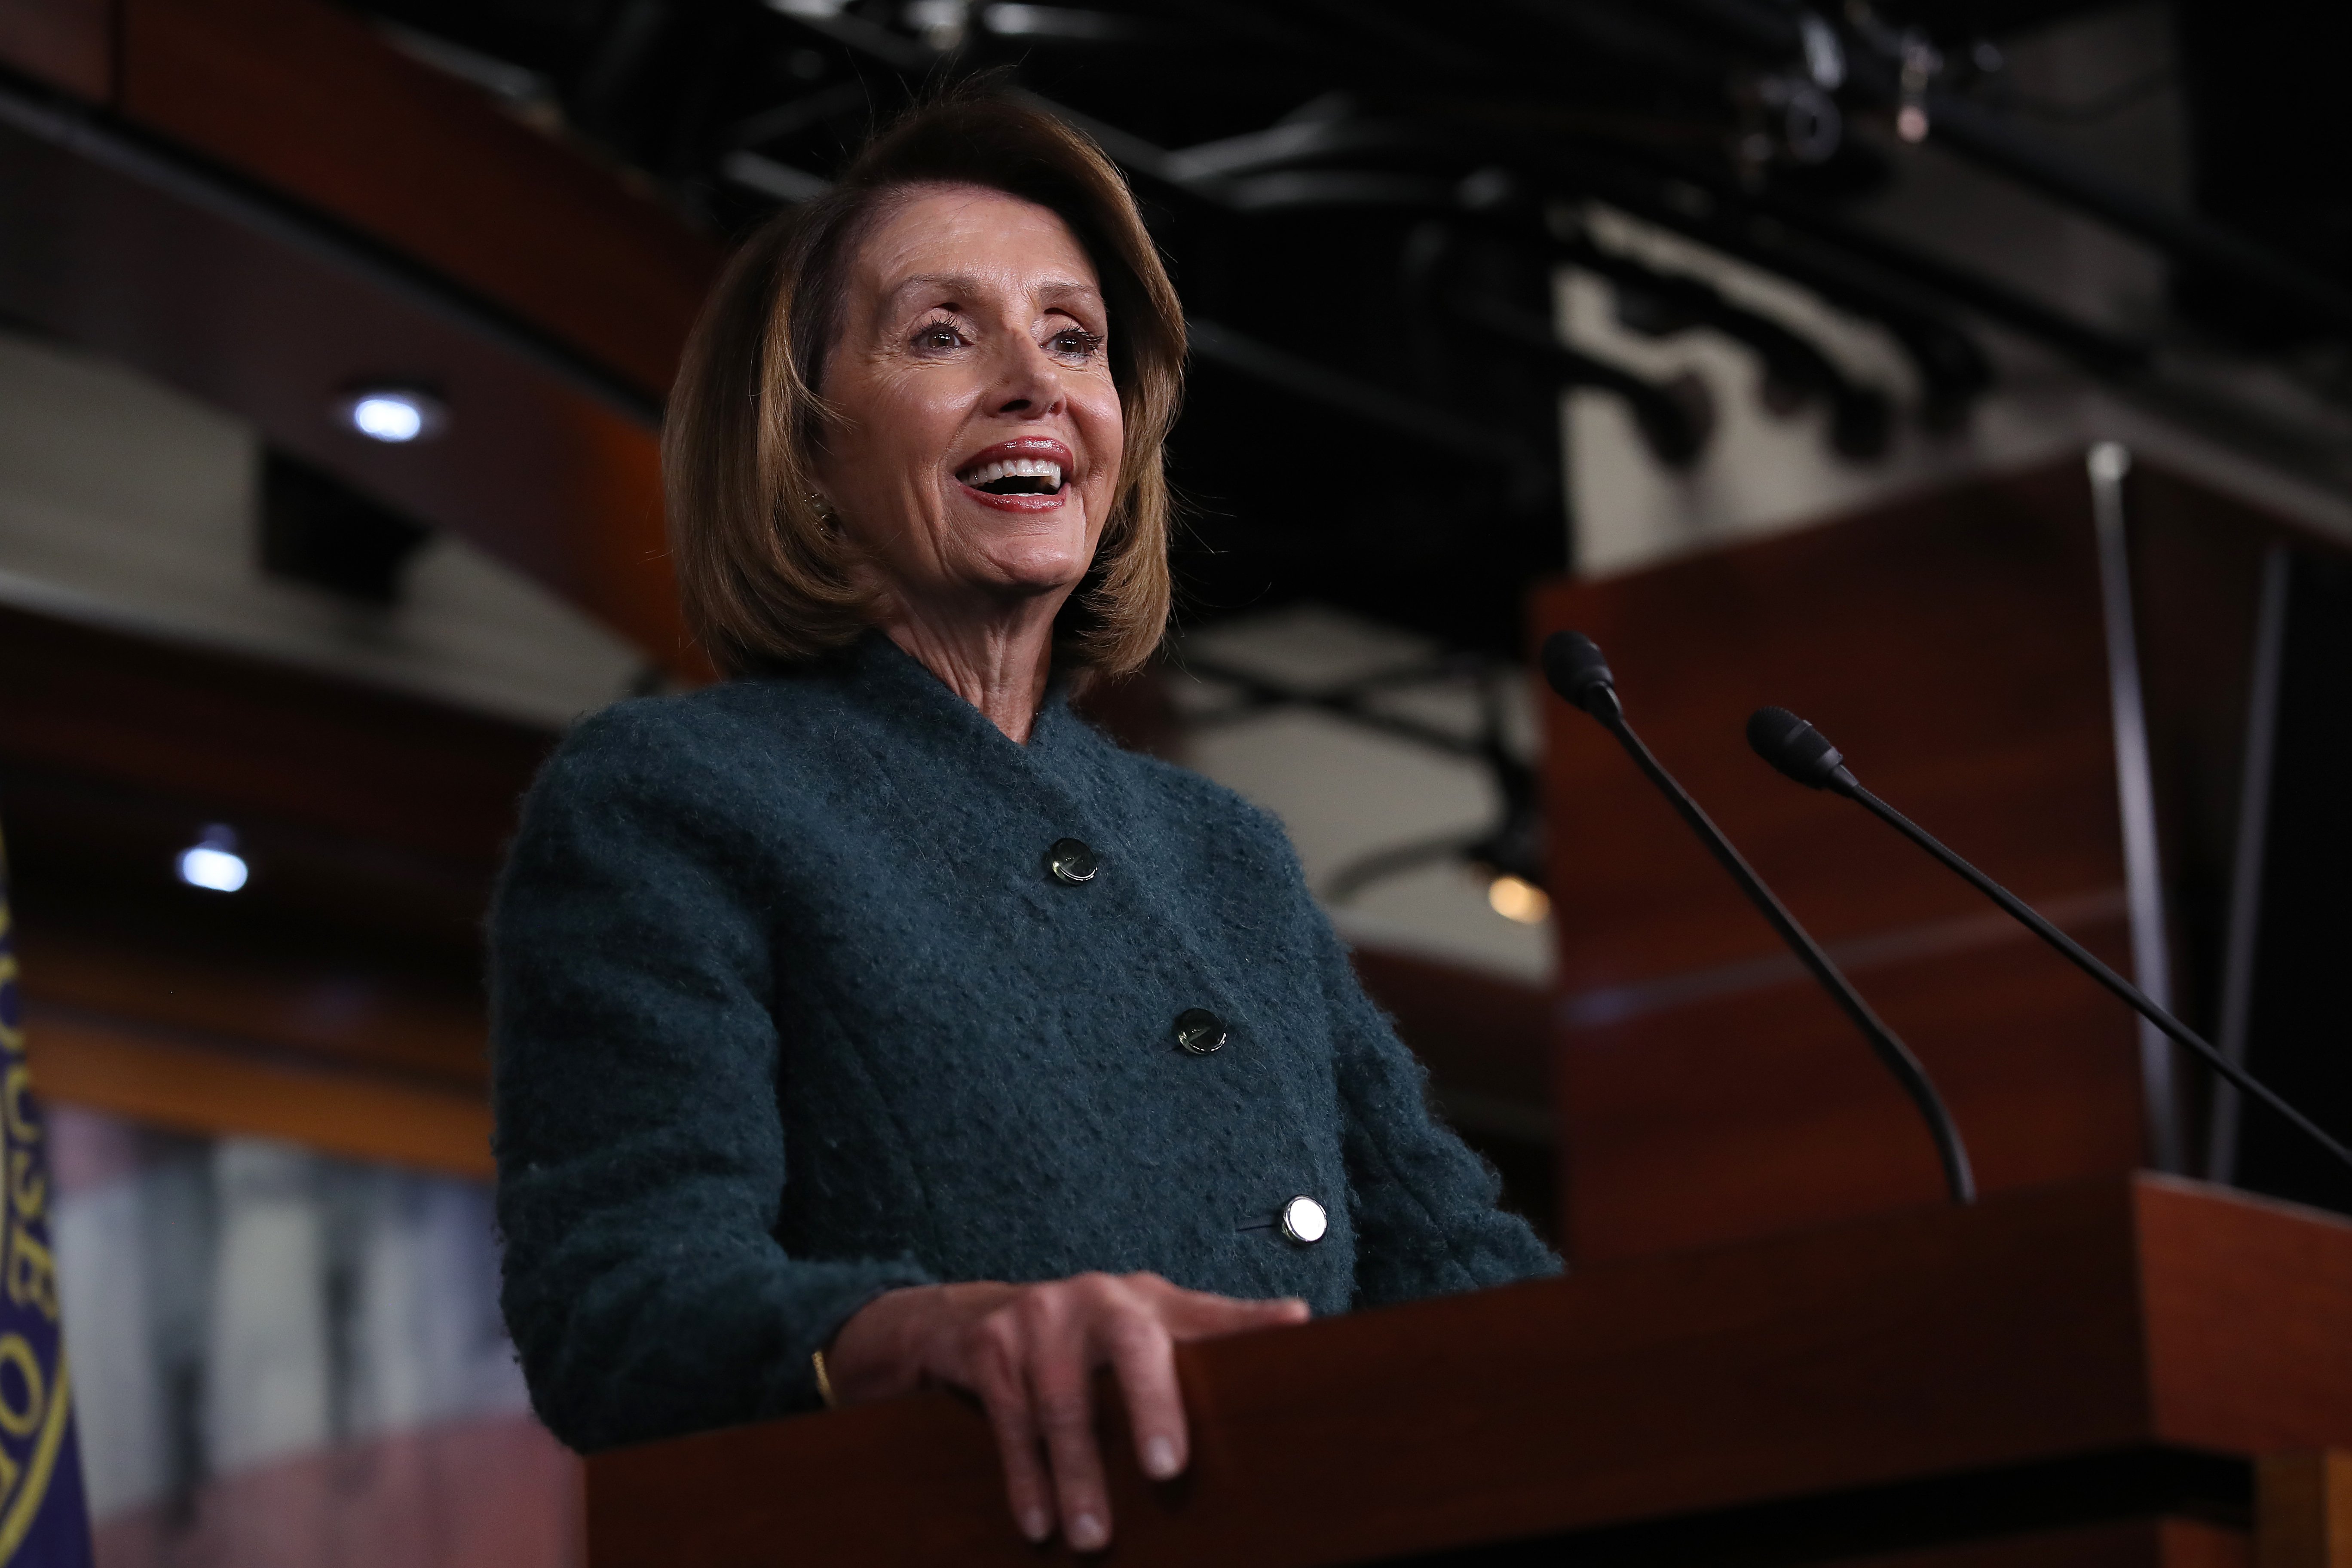 Speaker of the House Nancy Pelosi giving a speech | Photo: Getty Images